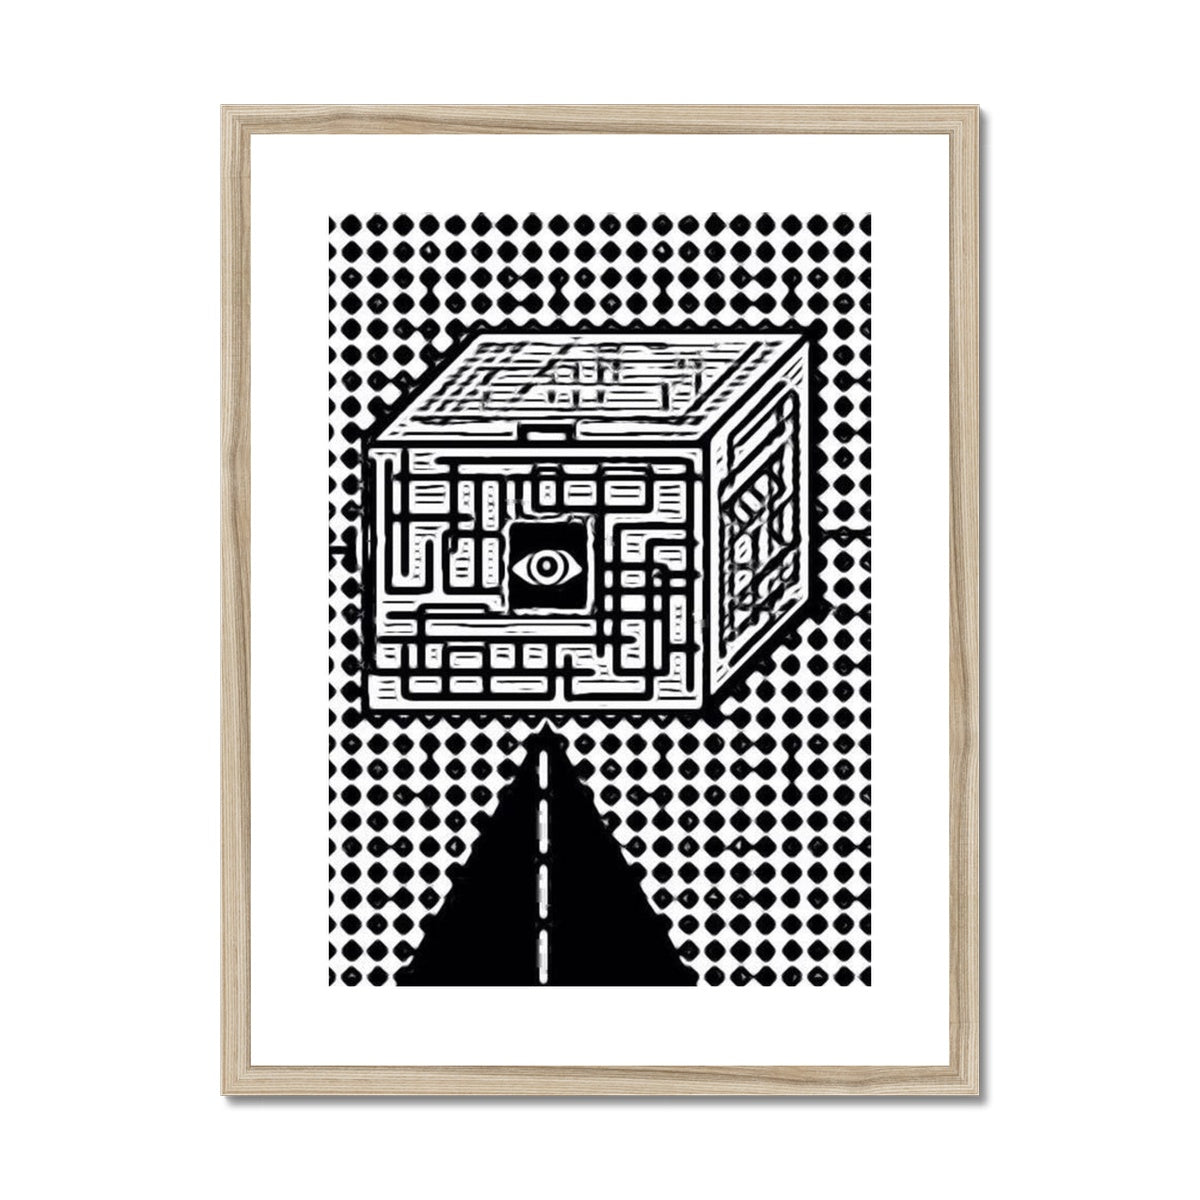 The Cube Framed & Mounted Print